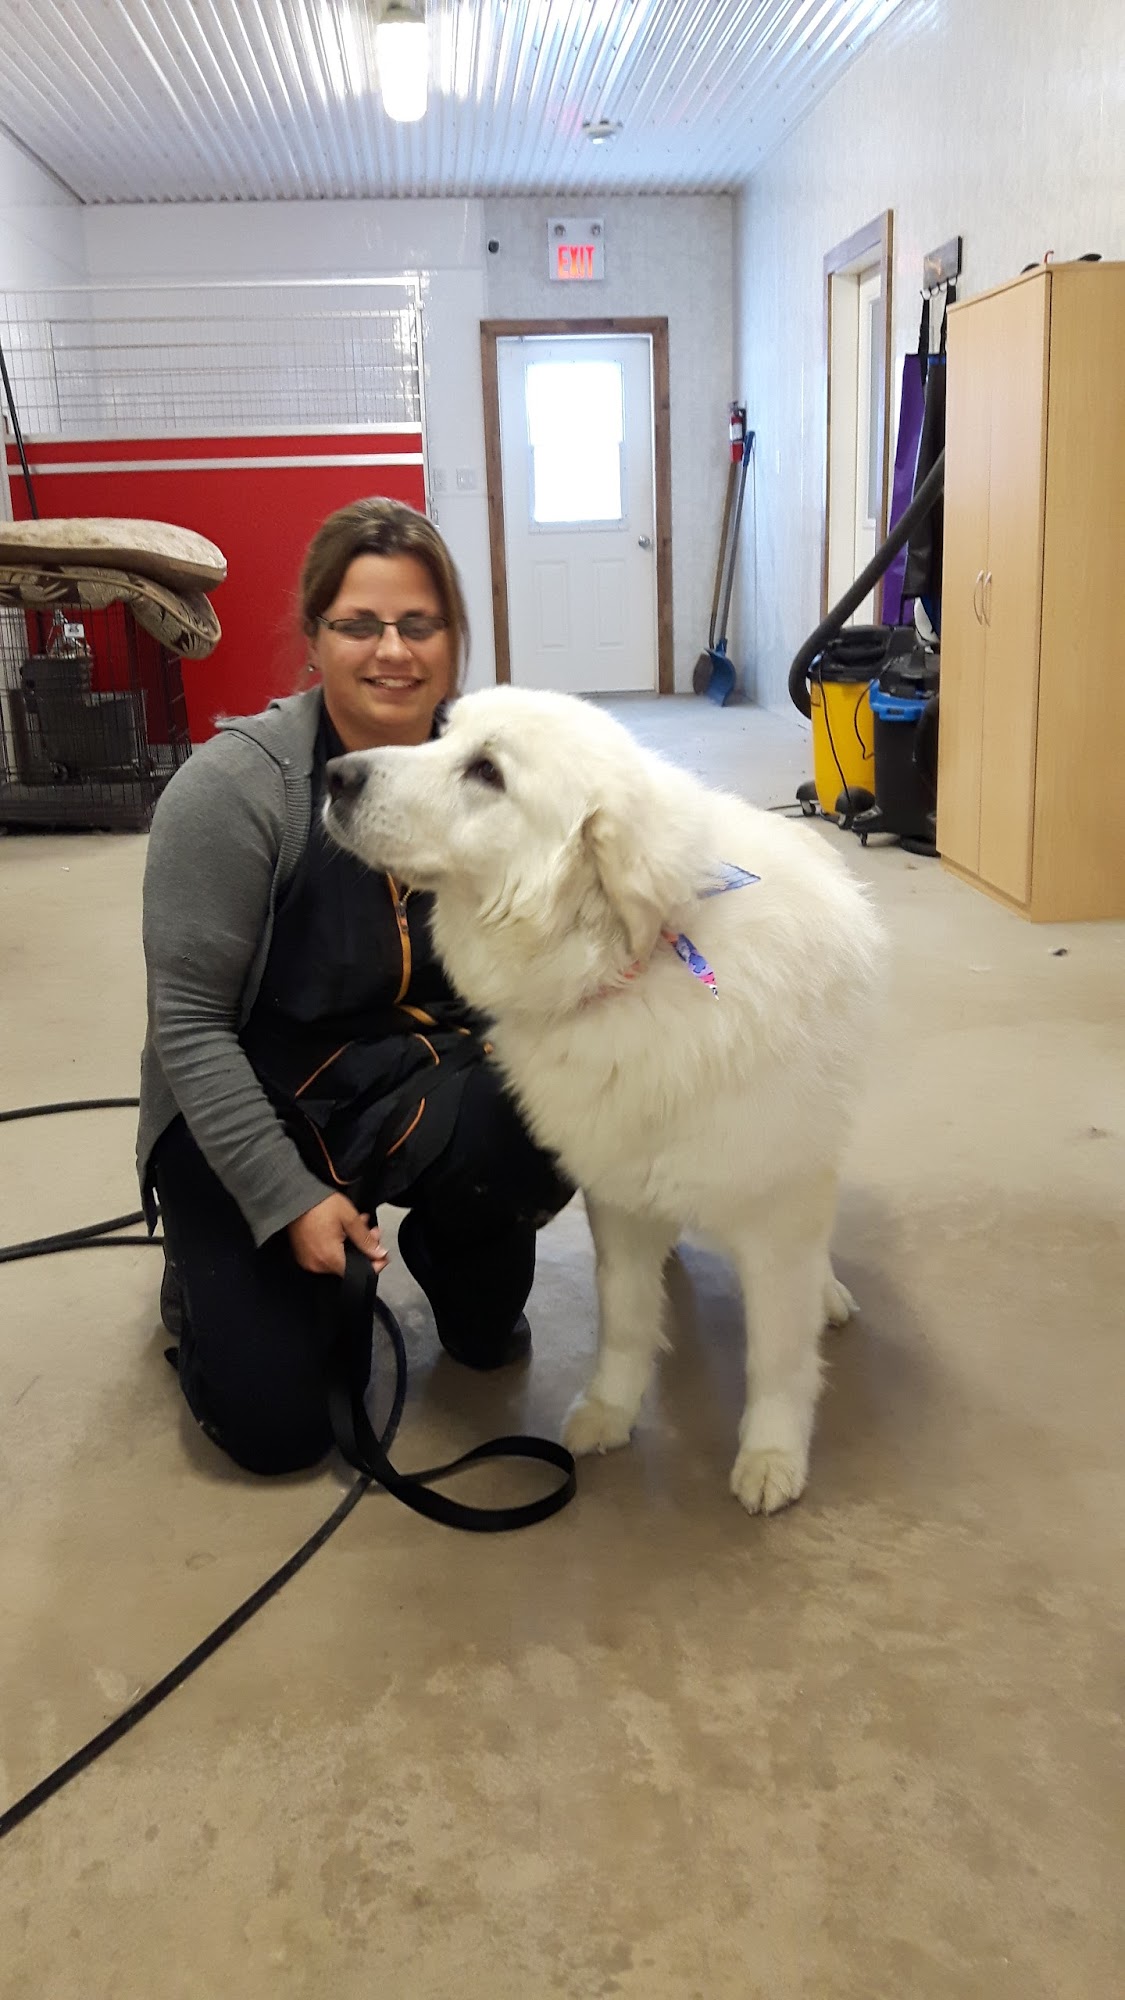 Perfect Paws Dog Grooming & Boarding 8318 Scotchmere Dr, Strathroy Ontario N7G 3H3